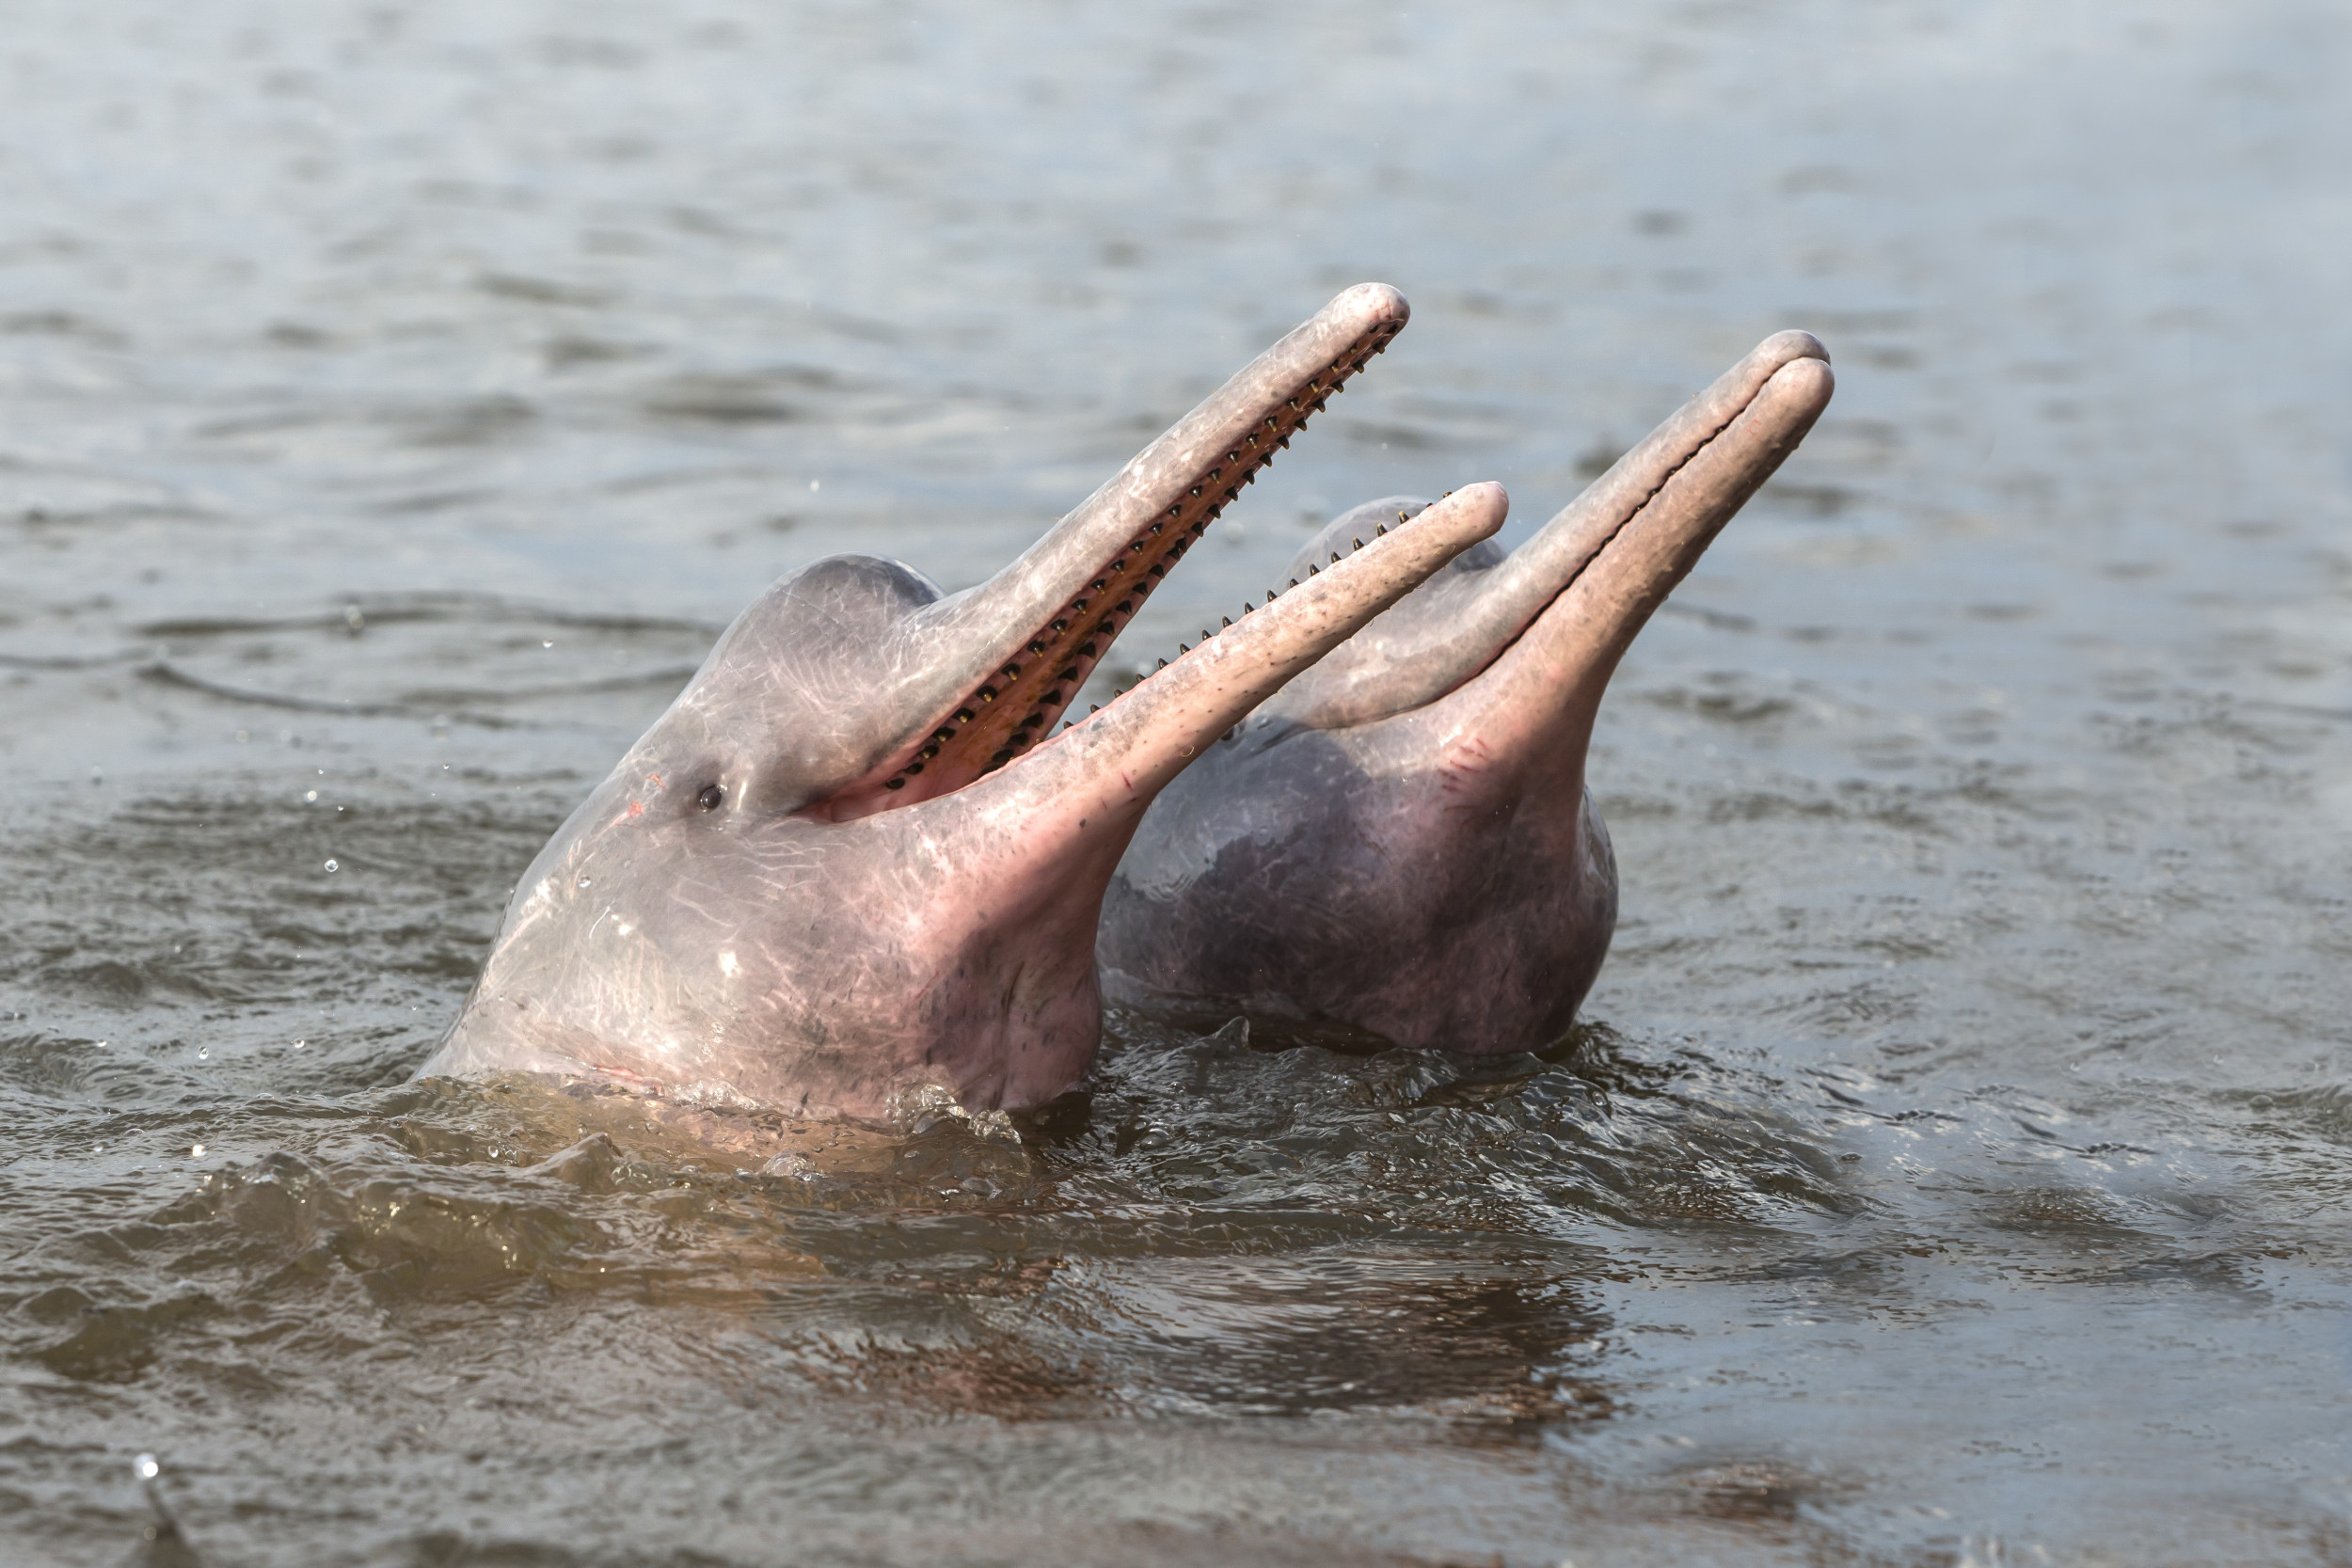 River Dolphin Bites Woman's Foot down to Bone in Extremely Unusual Attack